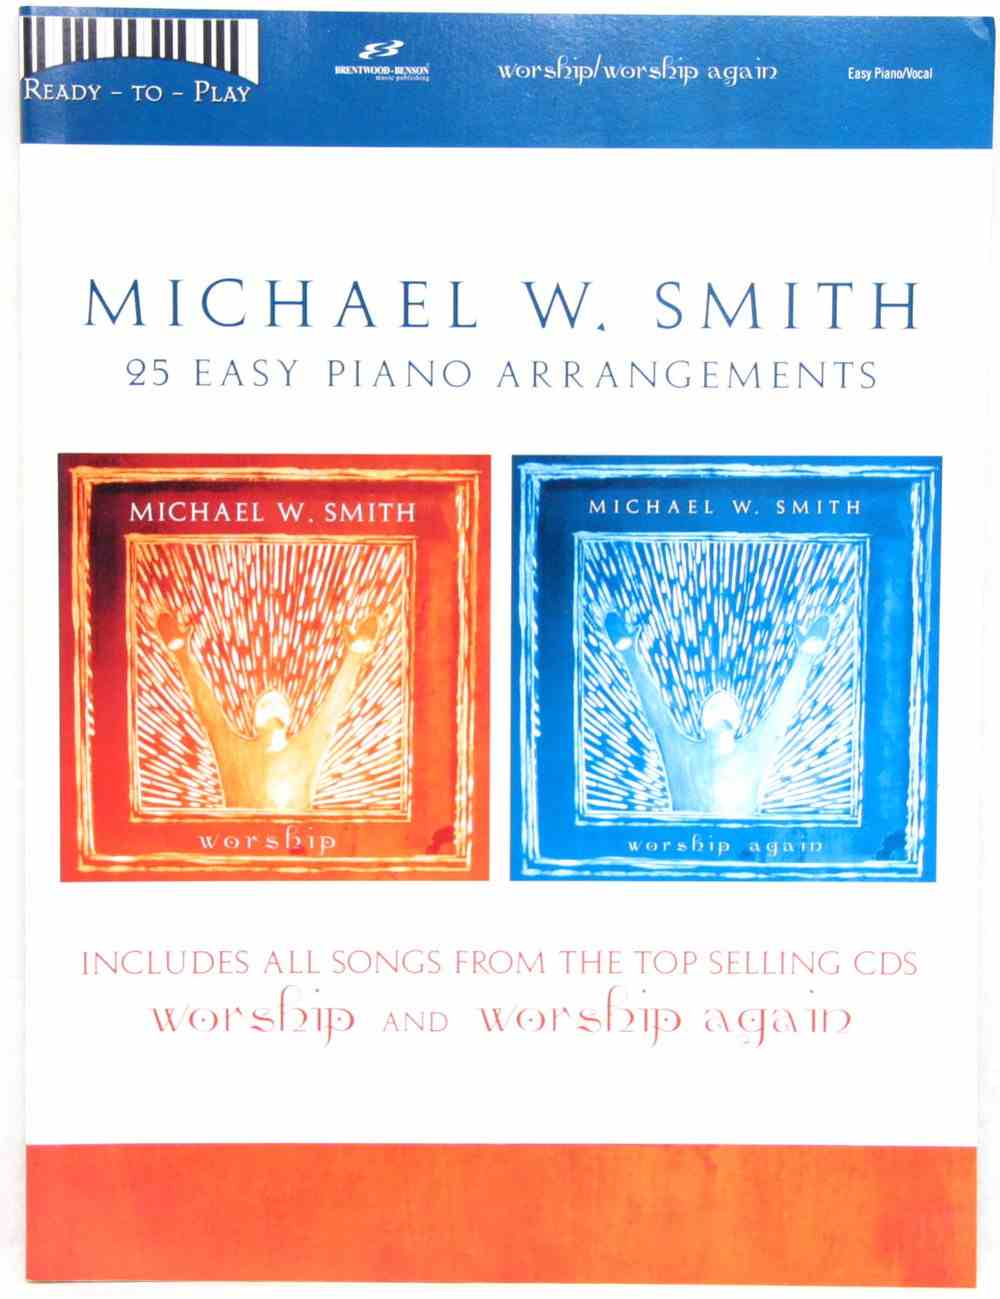 Draw me close to you michael w smith guitar chords ludagenesis